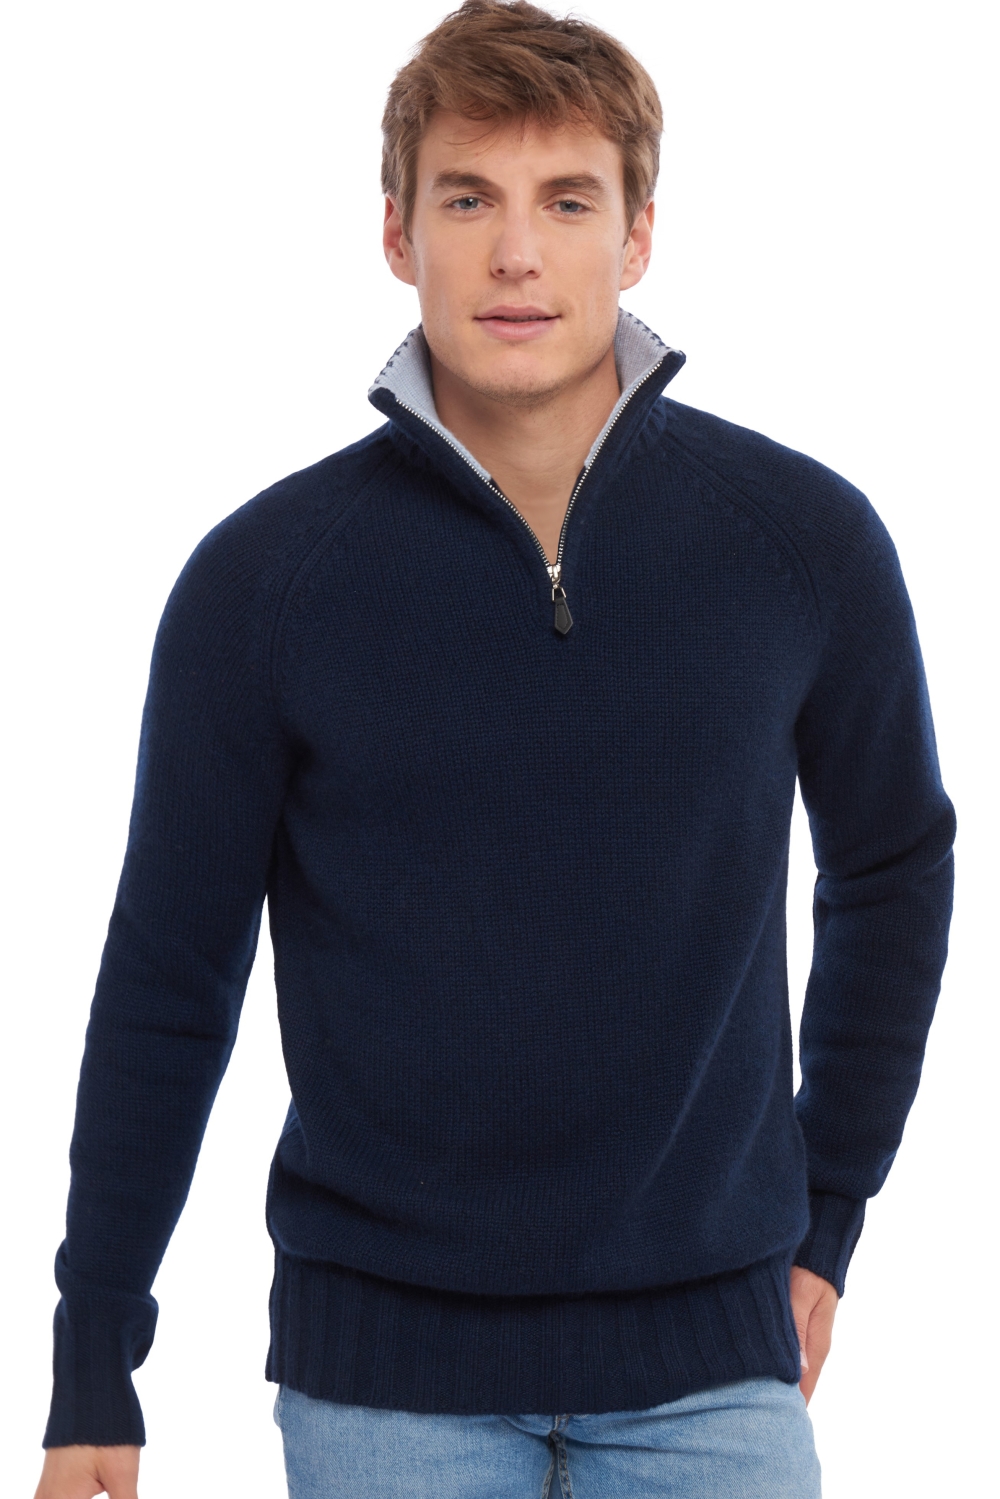 Cashmere men polo style sweaters olivier dress blue bayou l